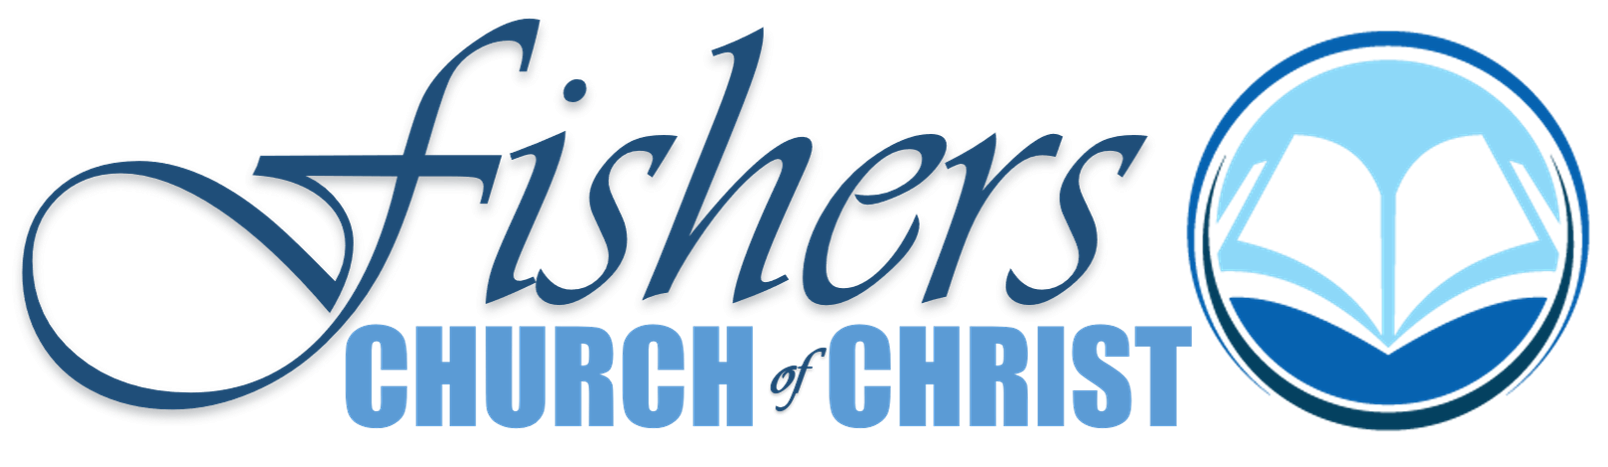 Fishers Church of Christ